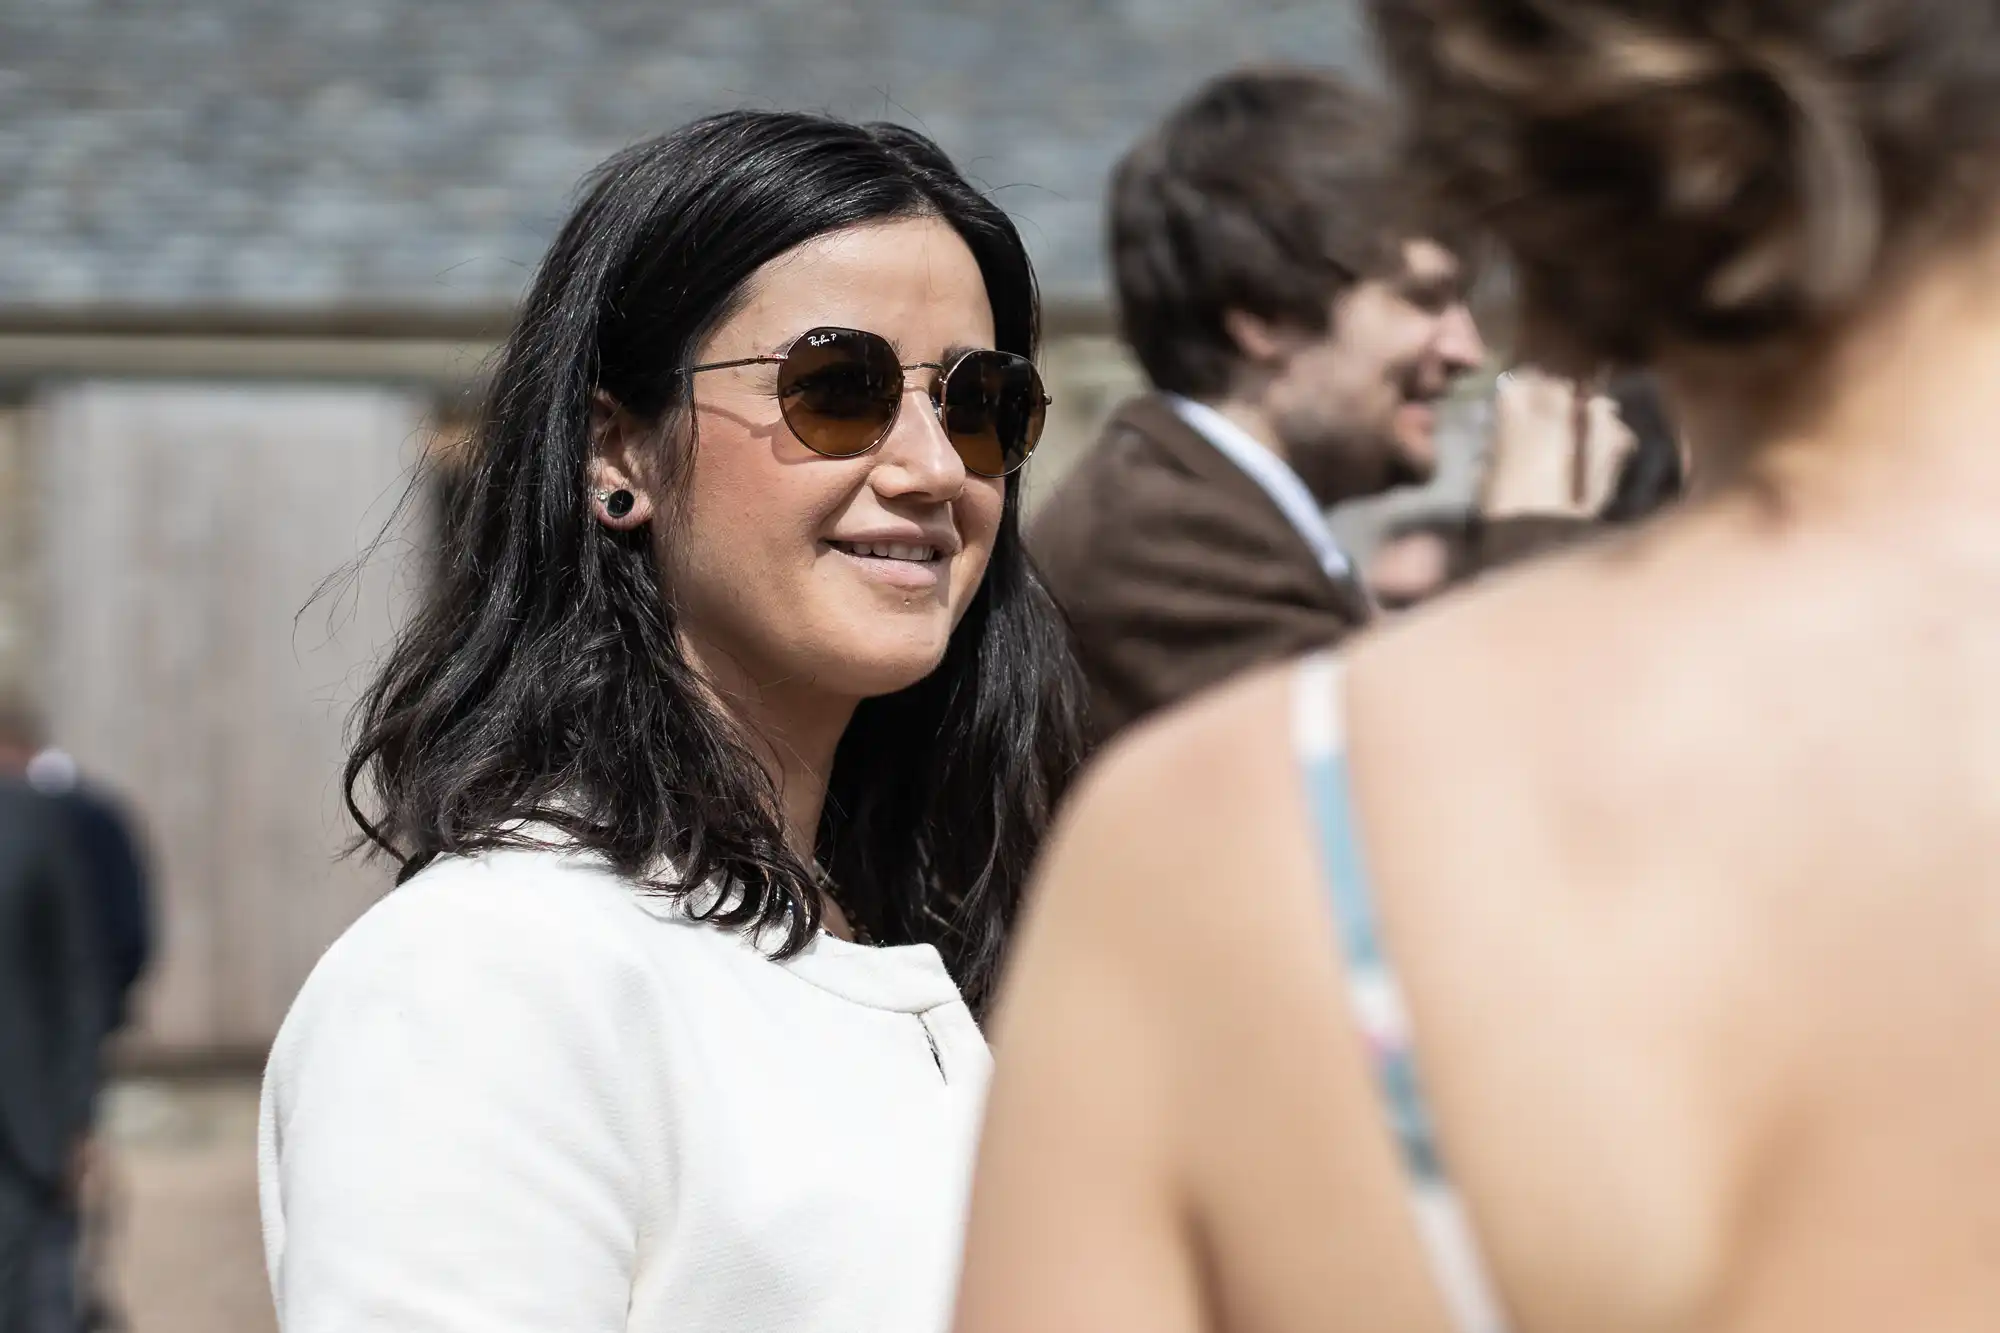 A woman in sunglasses and white top smiling and conversing at a sunny outdoor social event.